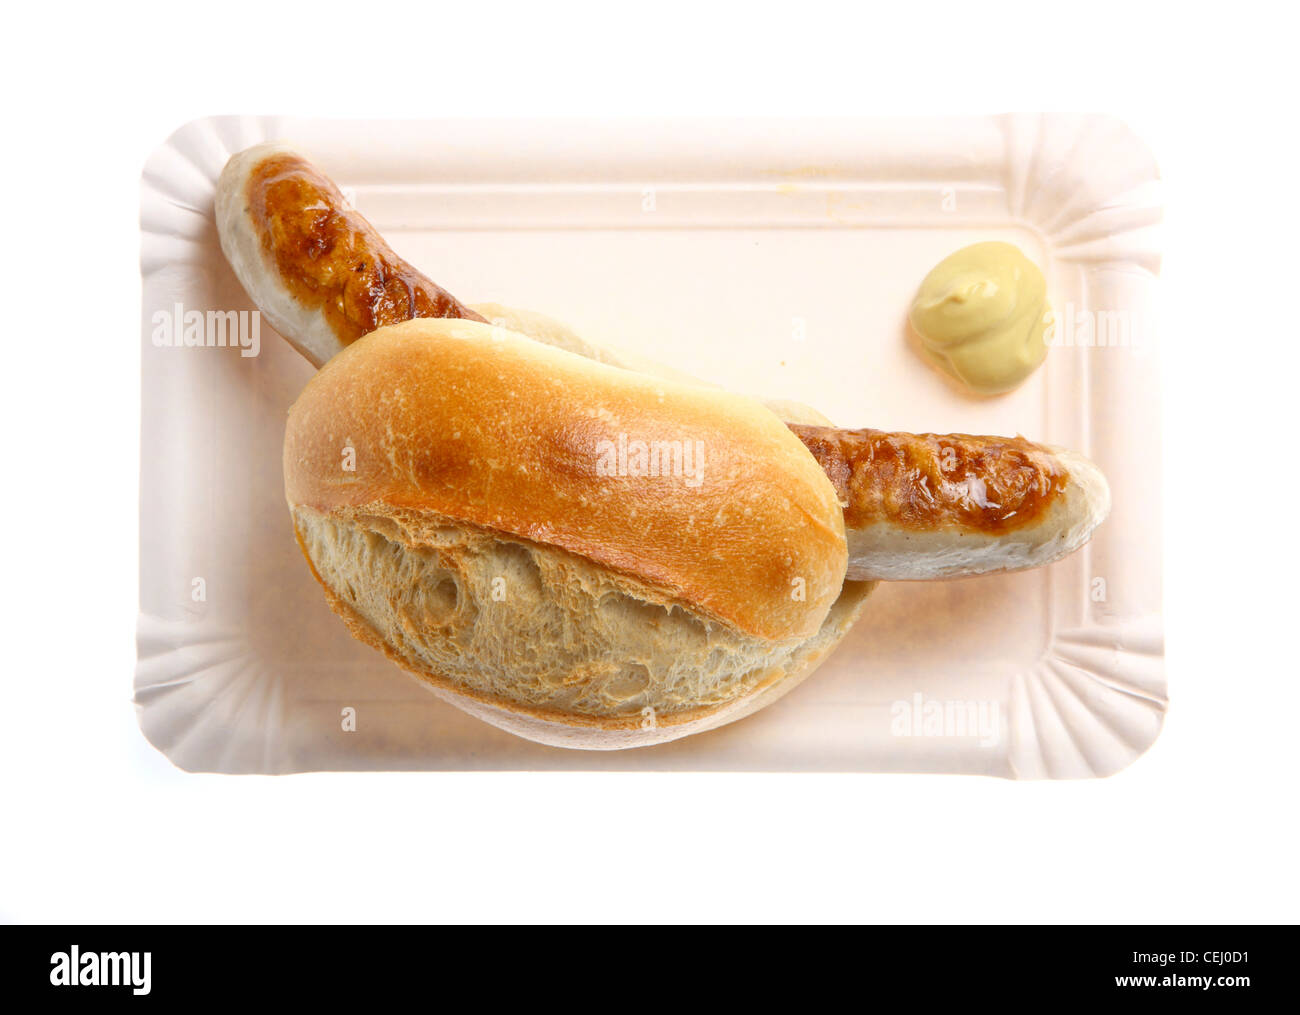 Nutrition, fast food. Bratwurst, meat sausage with a bread roll, mustard. Stock Photo